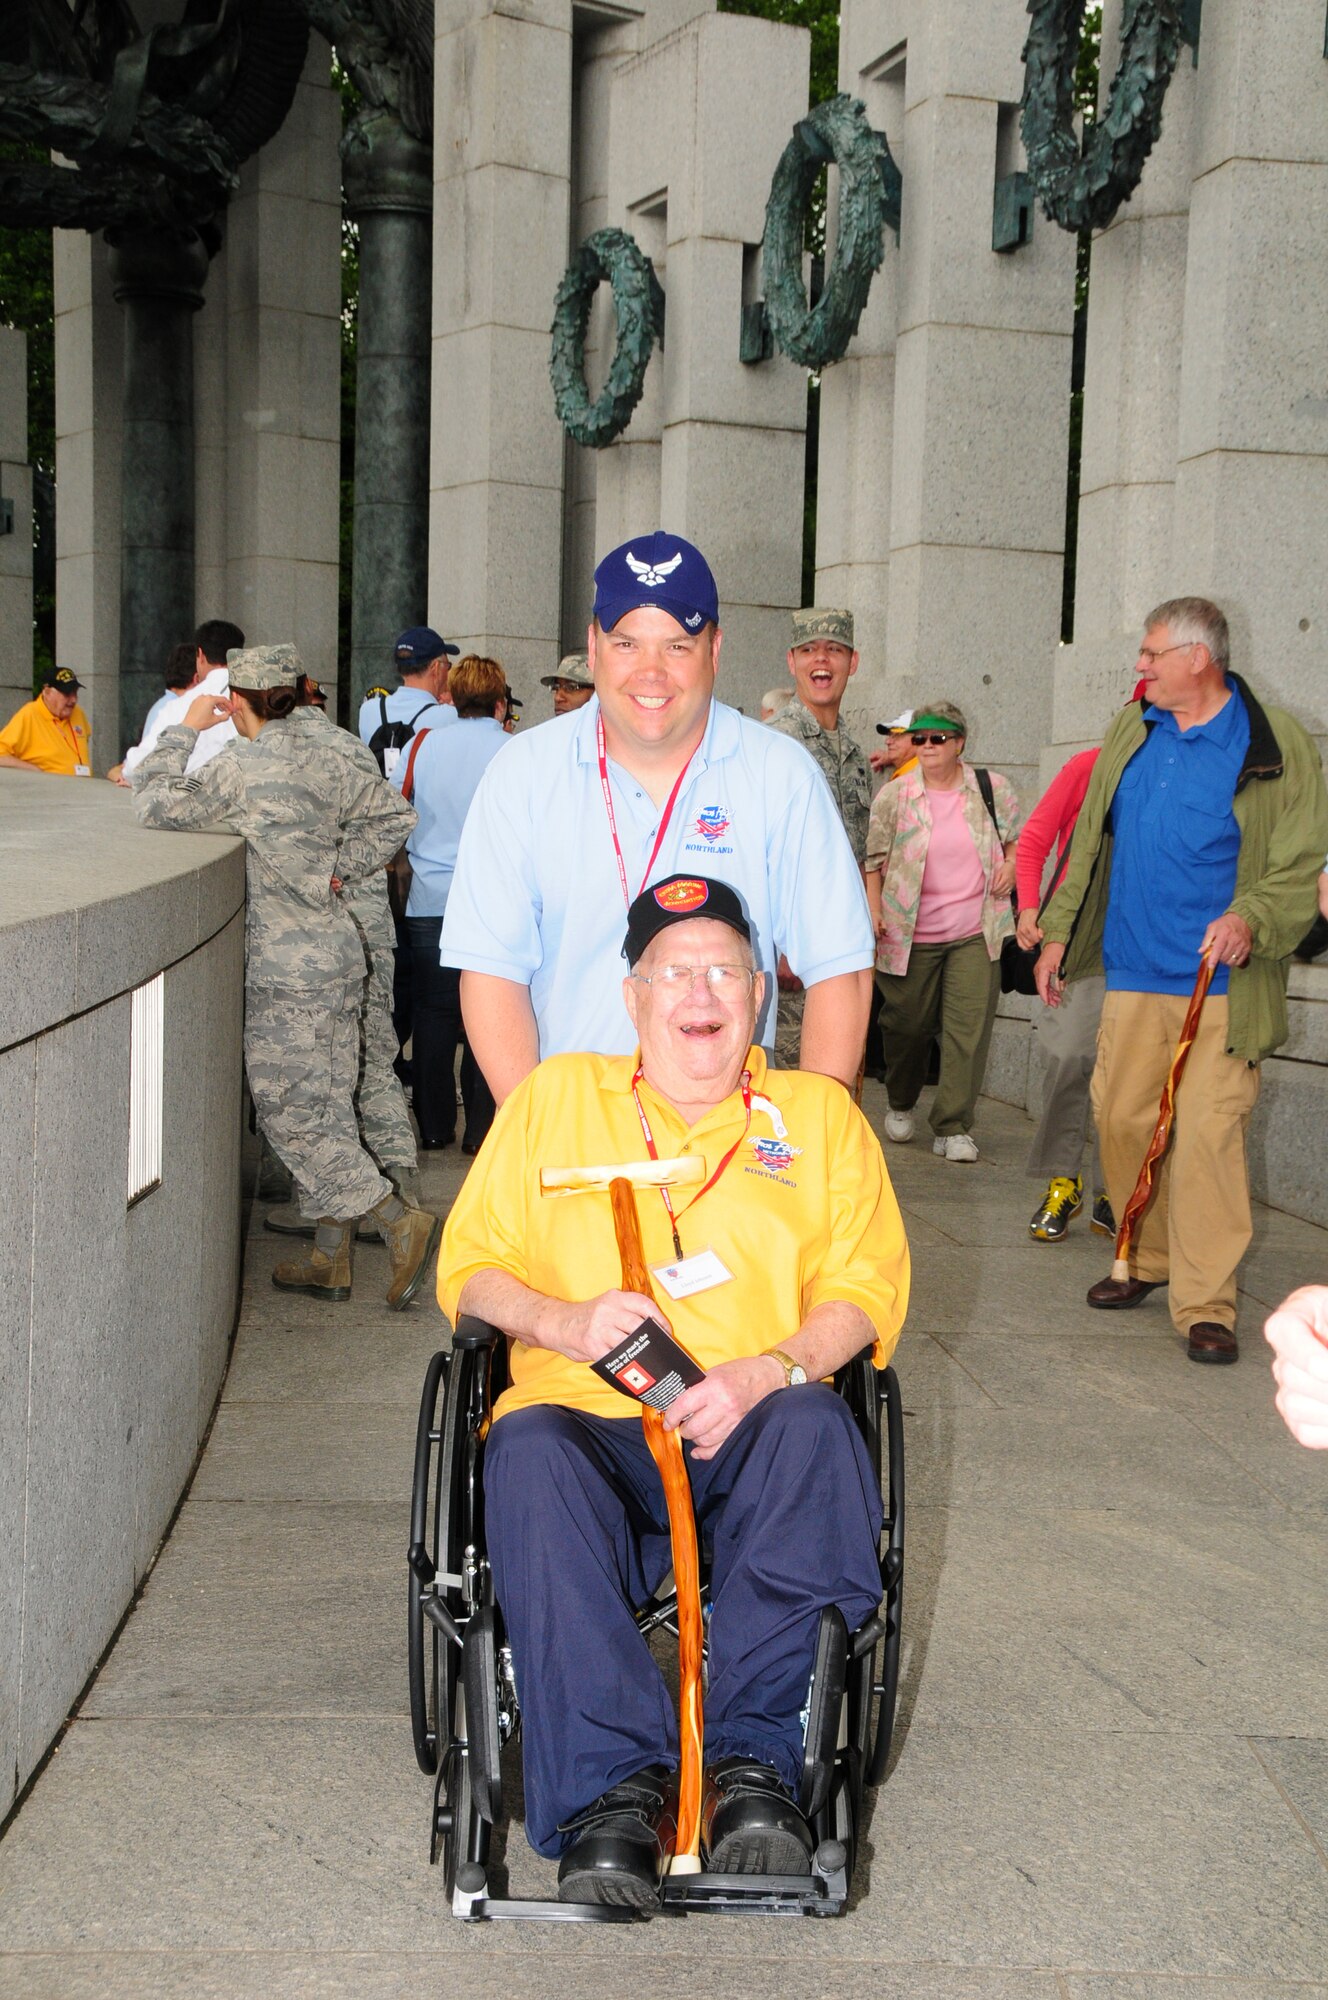 148th Fighter Wing member Senior Master Sgt. Kyle A. Johnson poses for a photo with his father Lloyd O. Johnson Tuesday May 15, 2012 at the World War II Memorial in Washington D.C.  85 veterans from northern Minnesota and Wisconsin took part in the third honor flight out of Duluth, Minn. (National Guard photo by Tech. Sgt. Scott G. Herrington.)